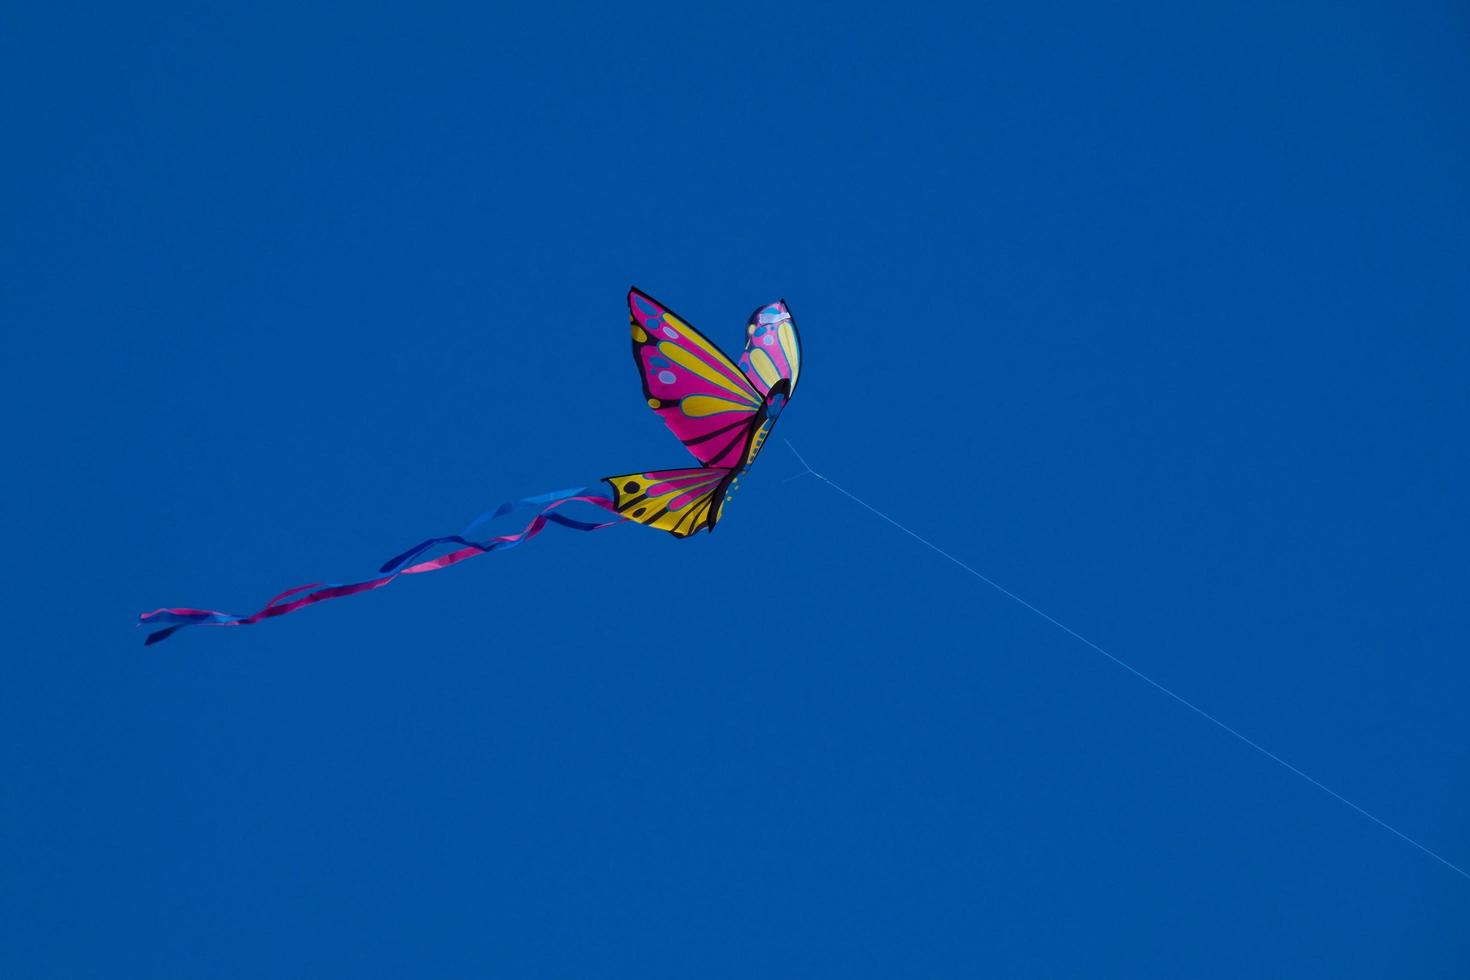 colourful kite flying under the blue sky photo